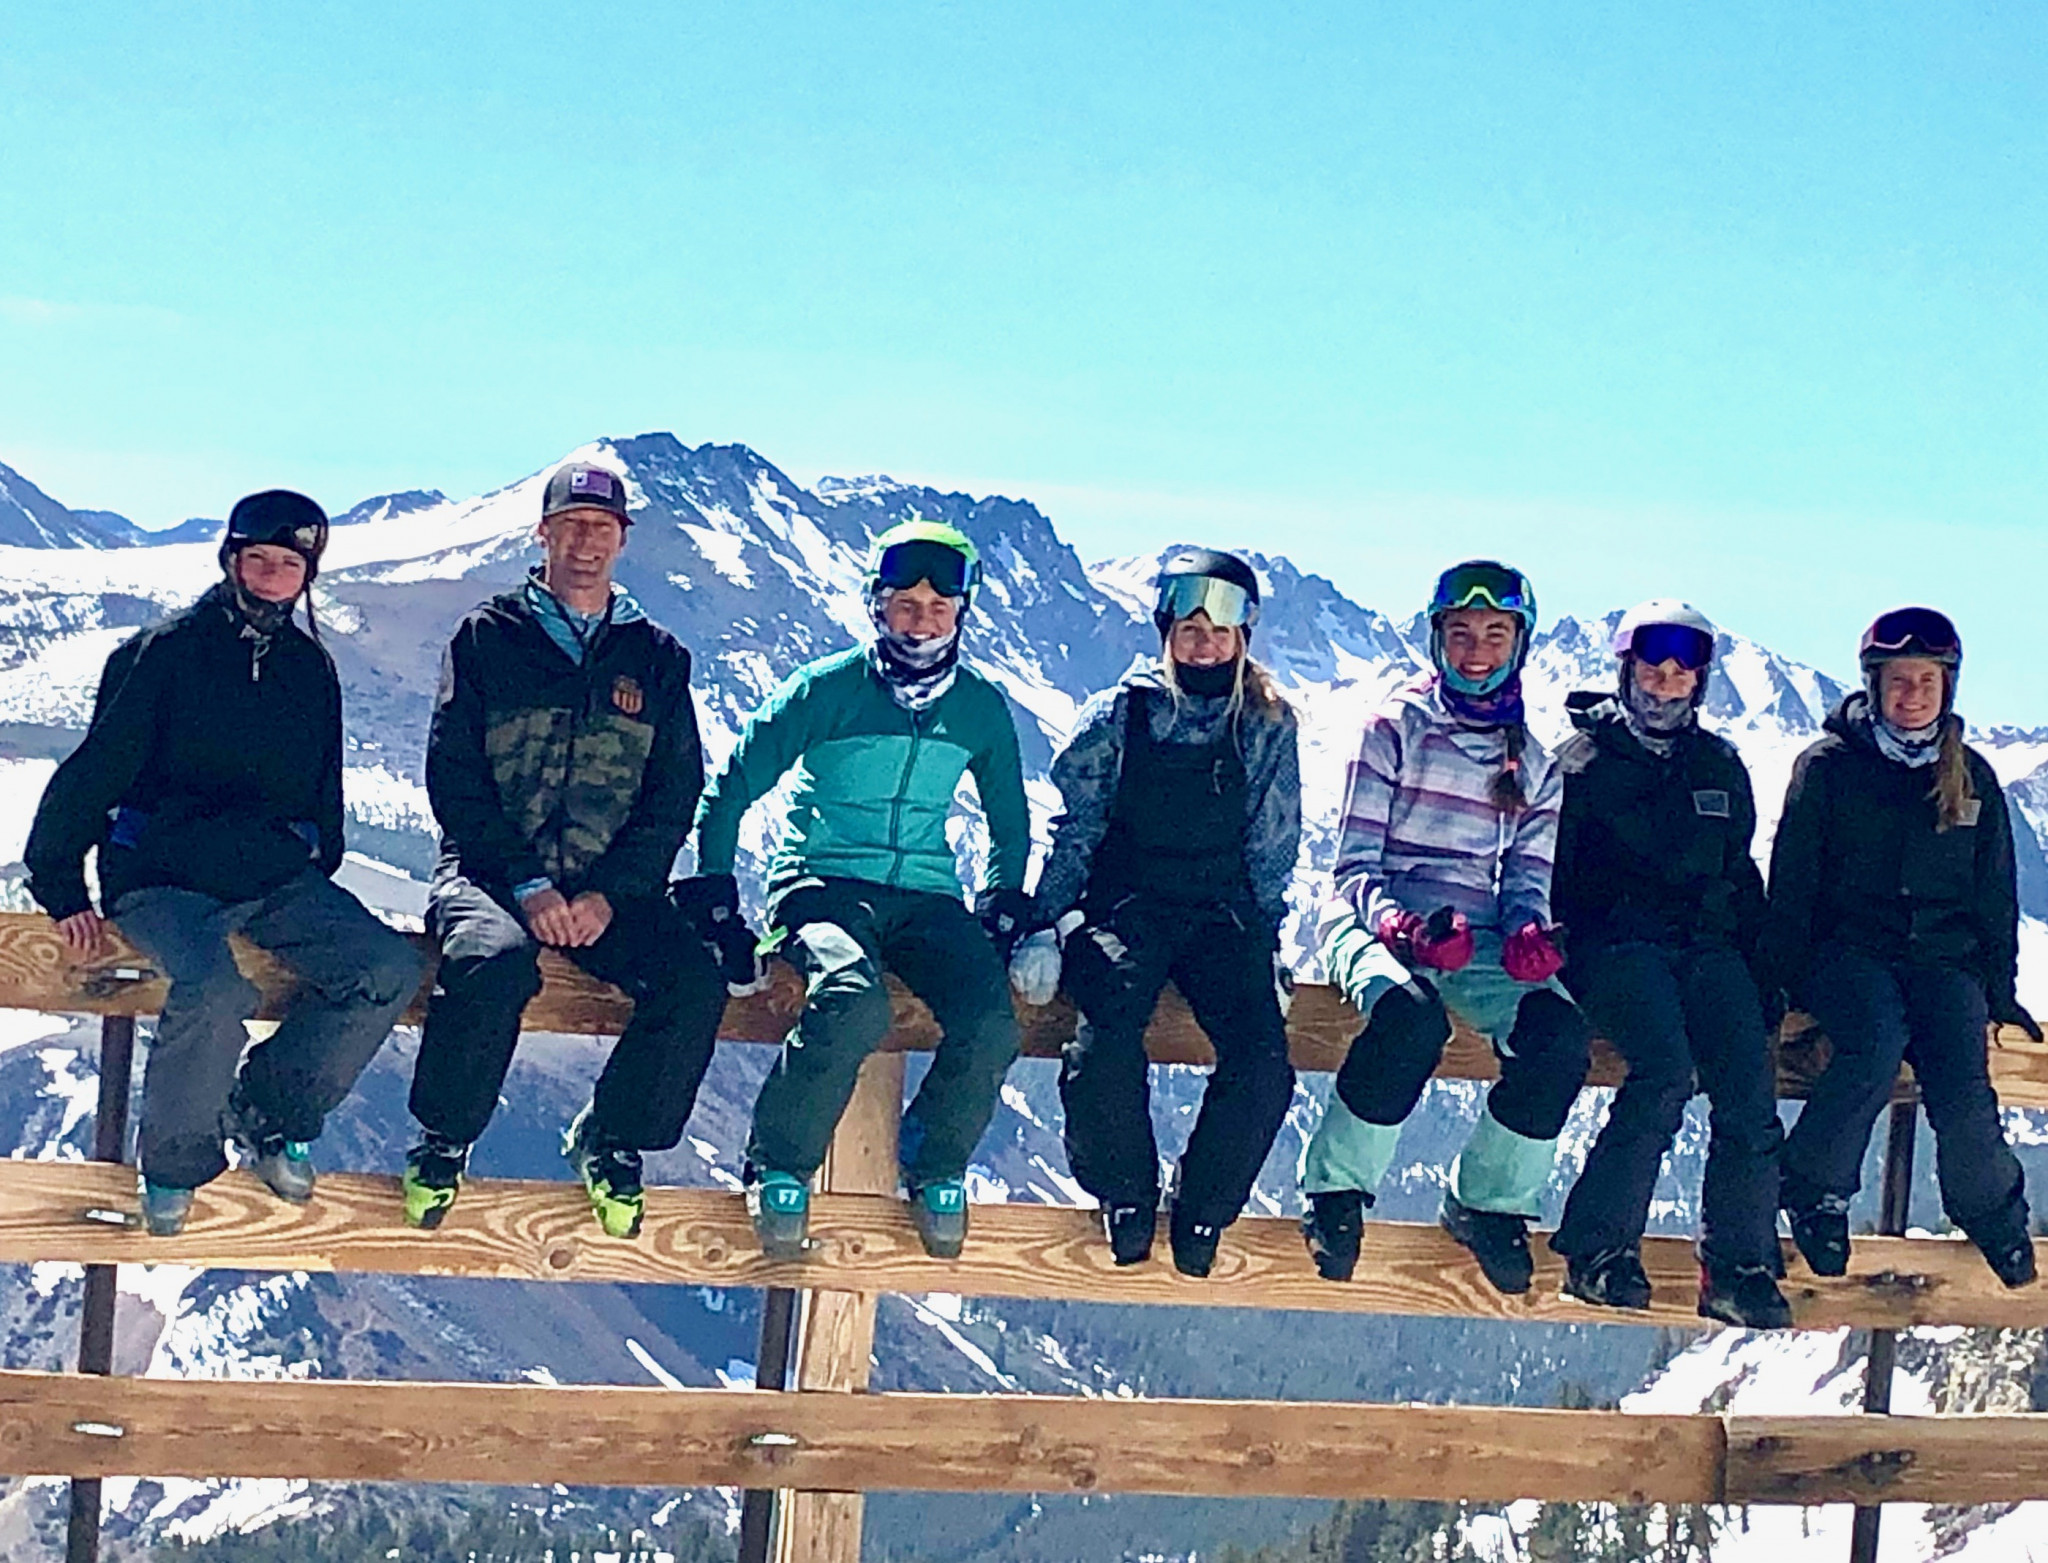 Around 100 of the best United States junior freeskiing and snowboard athletes have taken part in a talent development camp recognised as one of the main breeding grounds of Winter Olympic talent ©US Ski and Snowboard